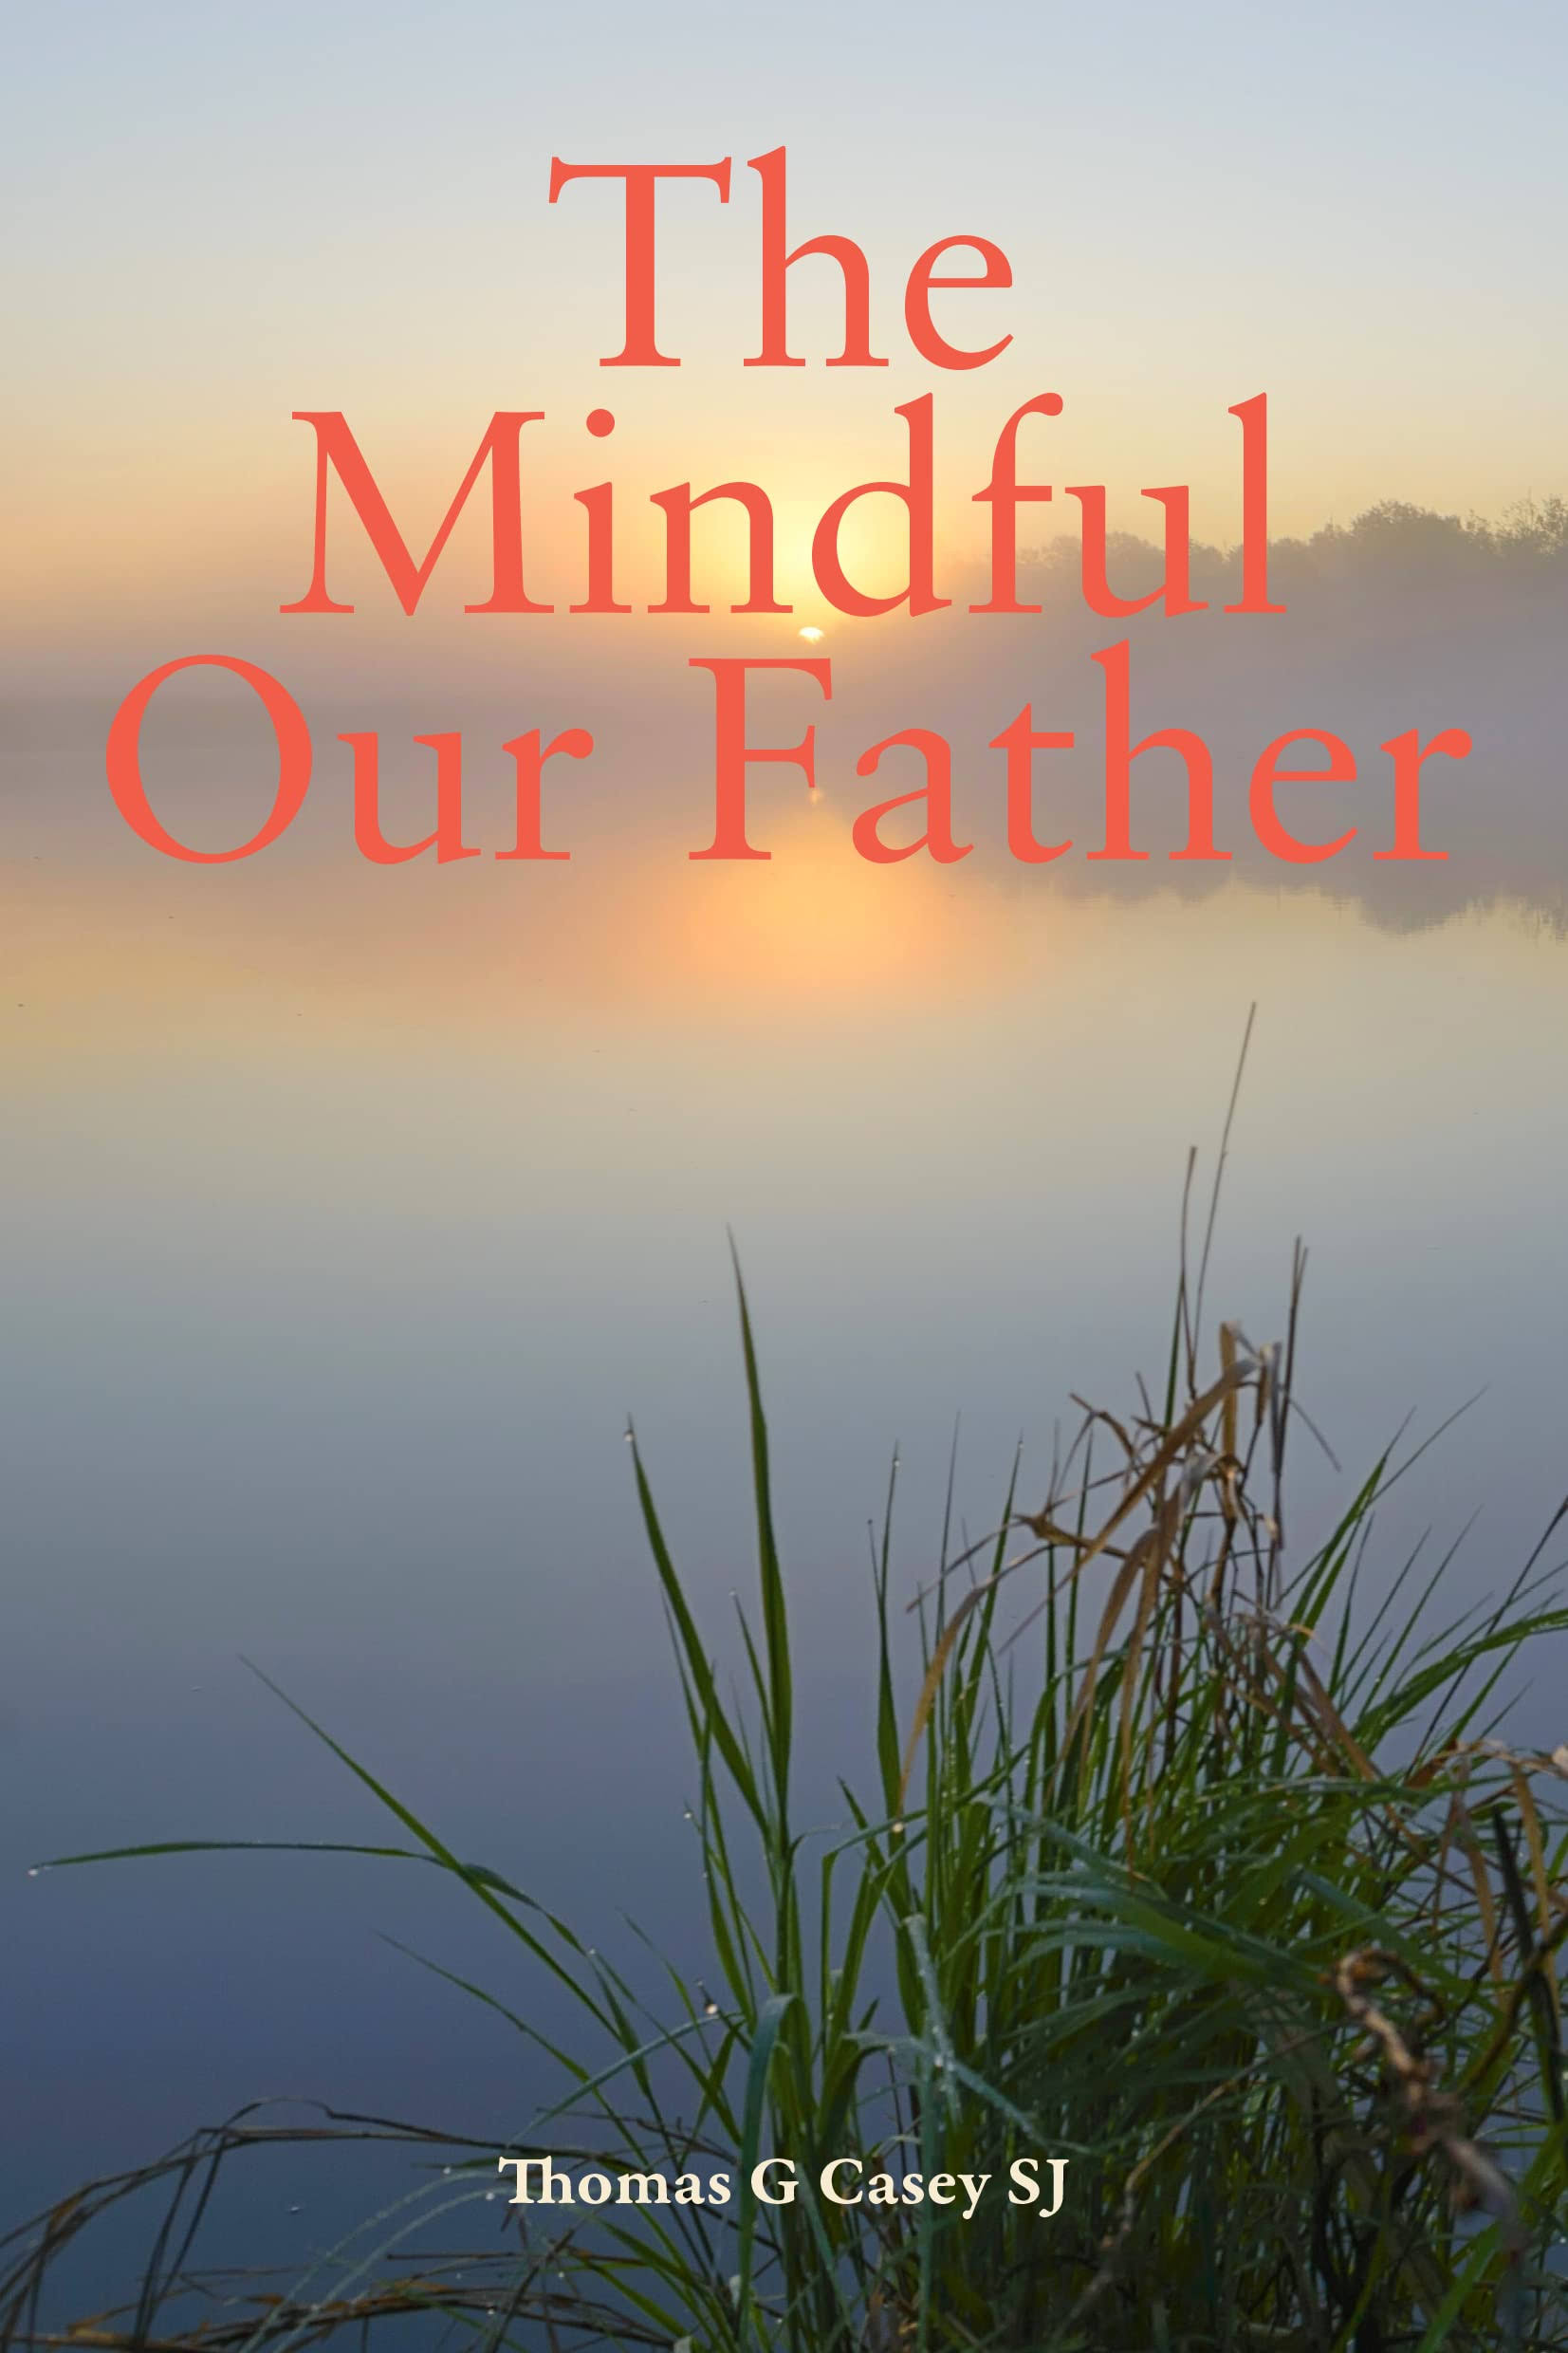 The Mindful Our Father [Book]